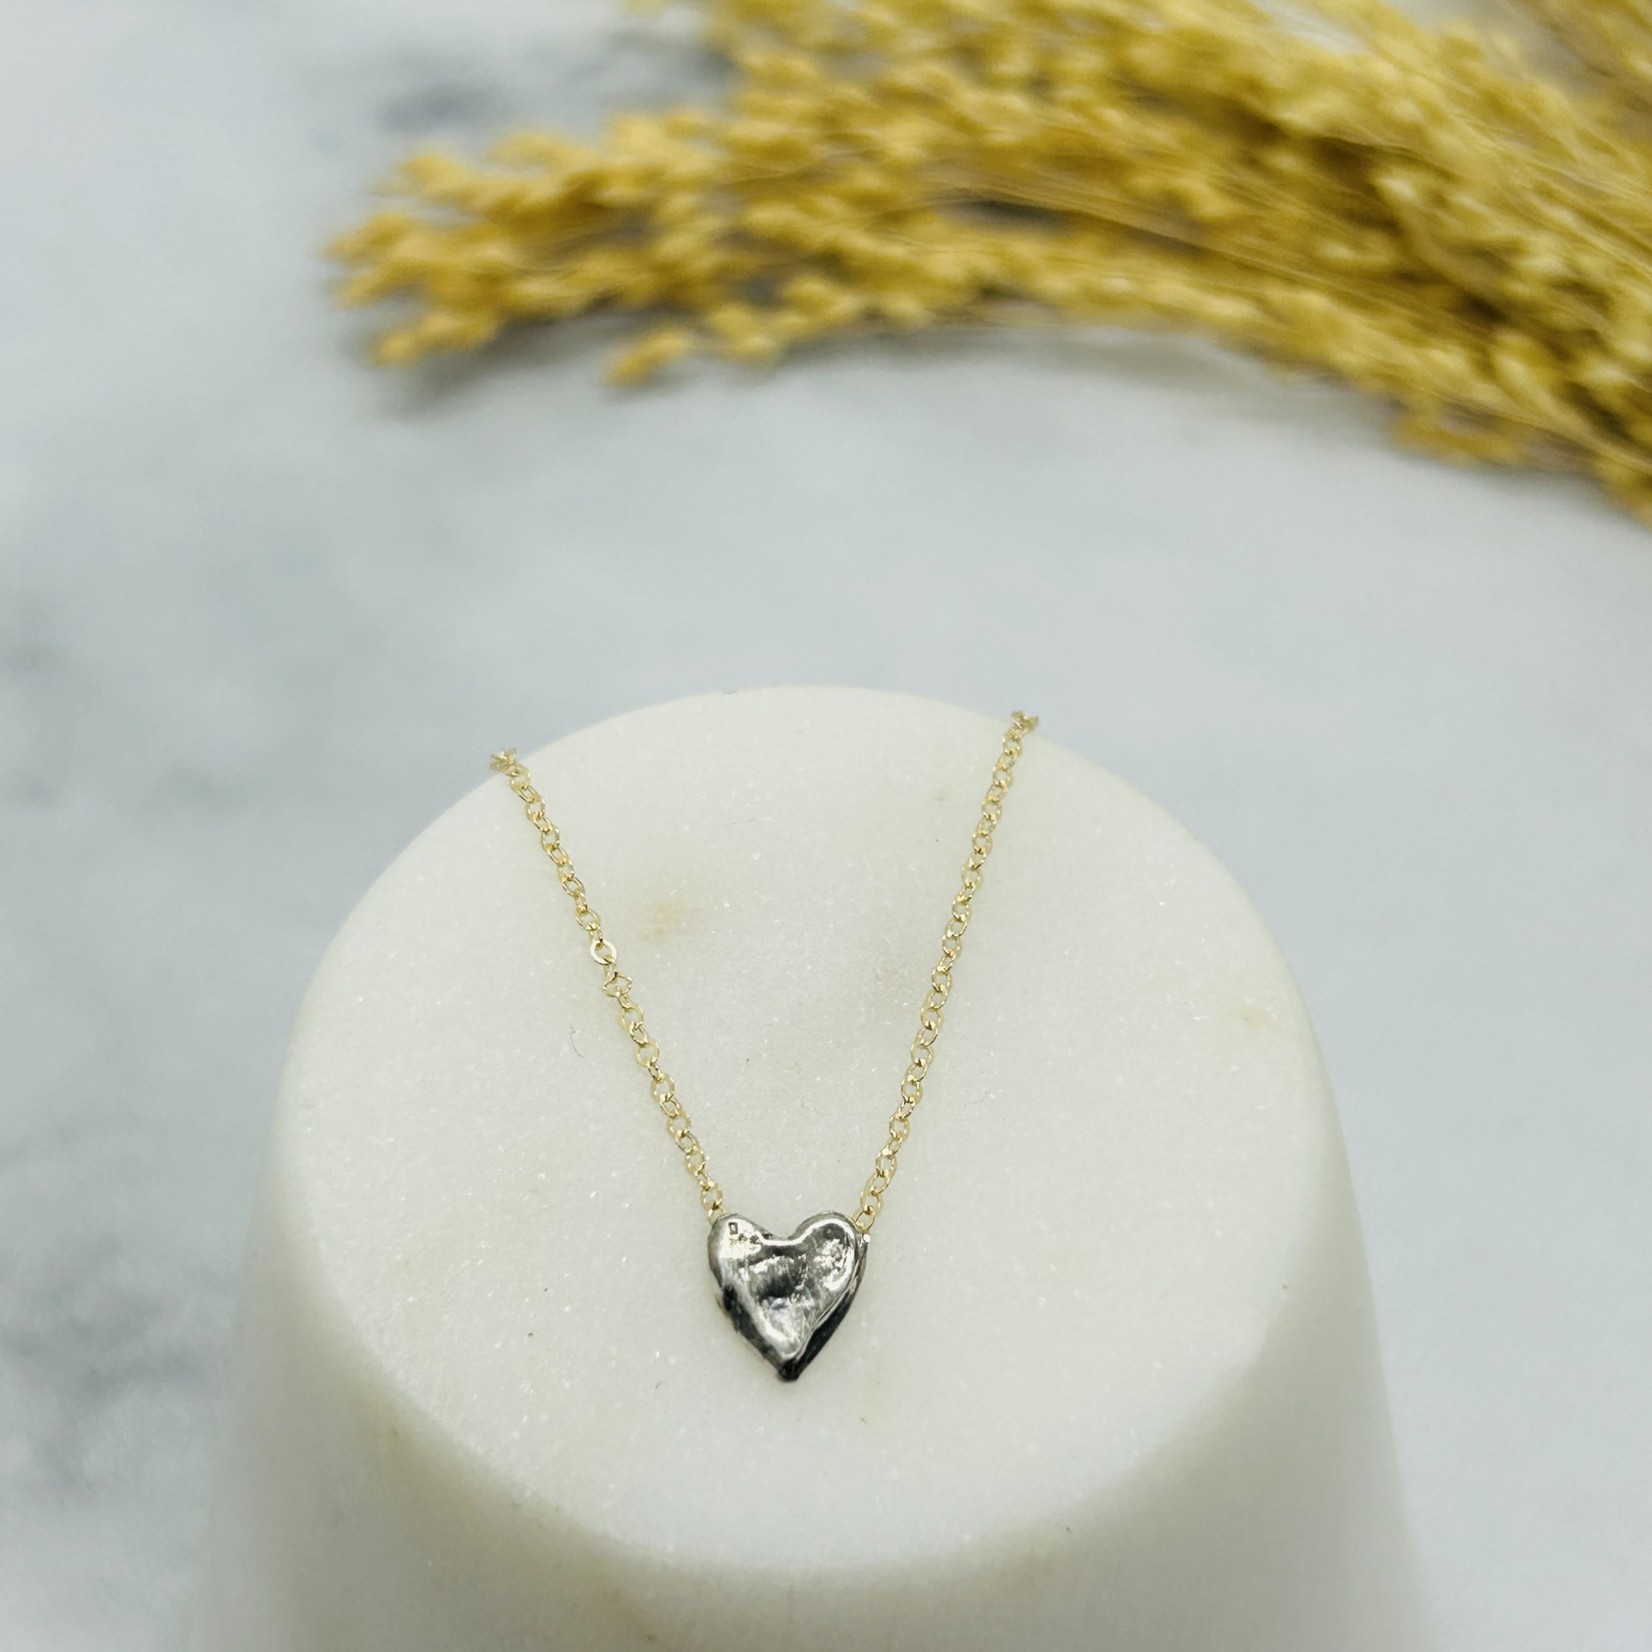 Handmade Sterling Silver Heart on 14kt Goldfilled Chain Necklace